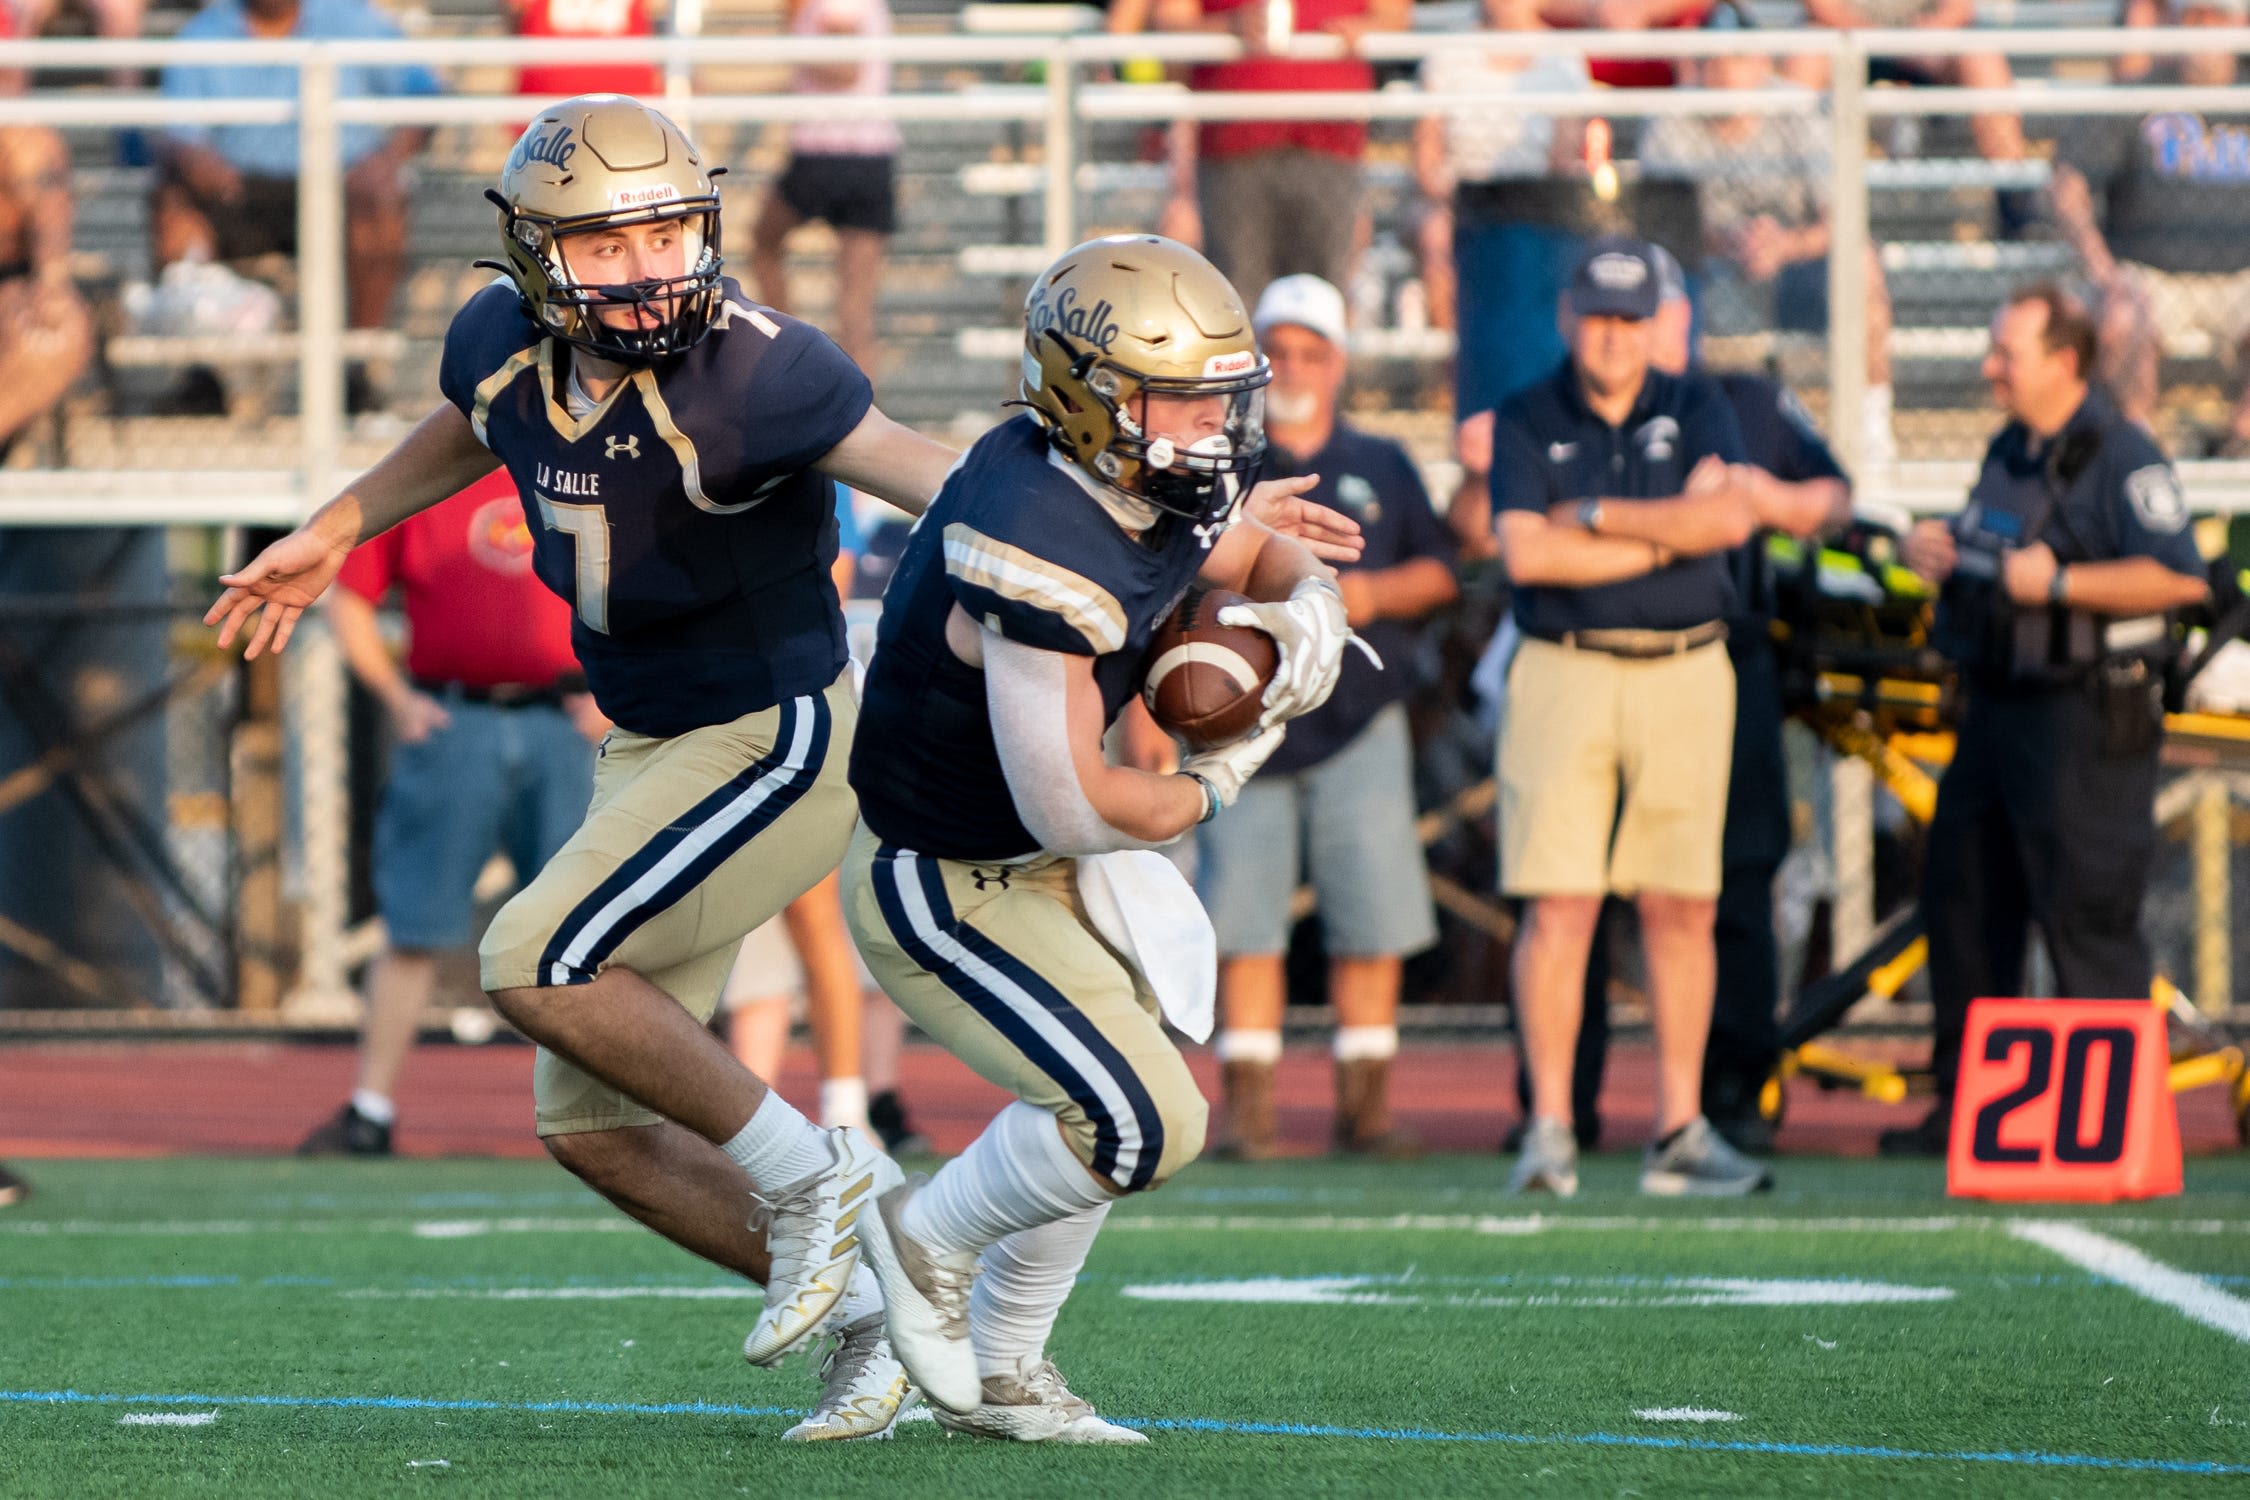 La Salle High's QB Gavin Sidwar commits to Rutgers. Why he choose the Big Ten team early